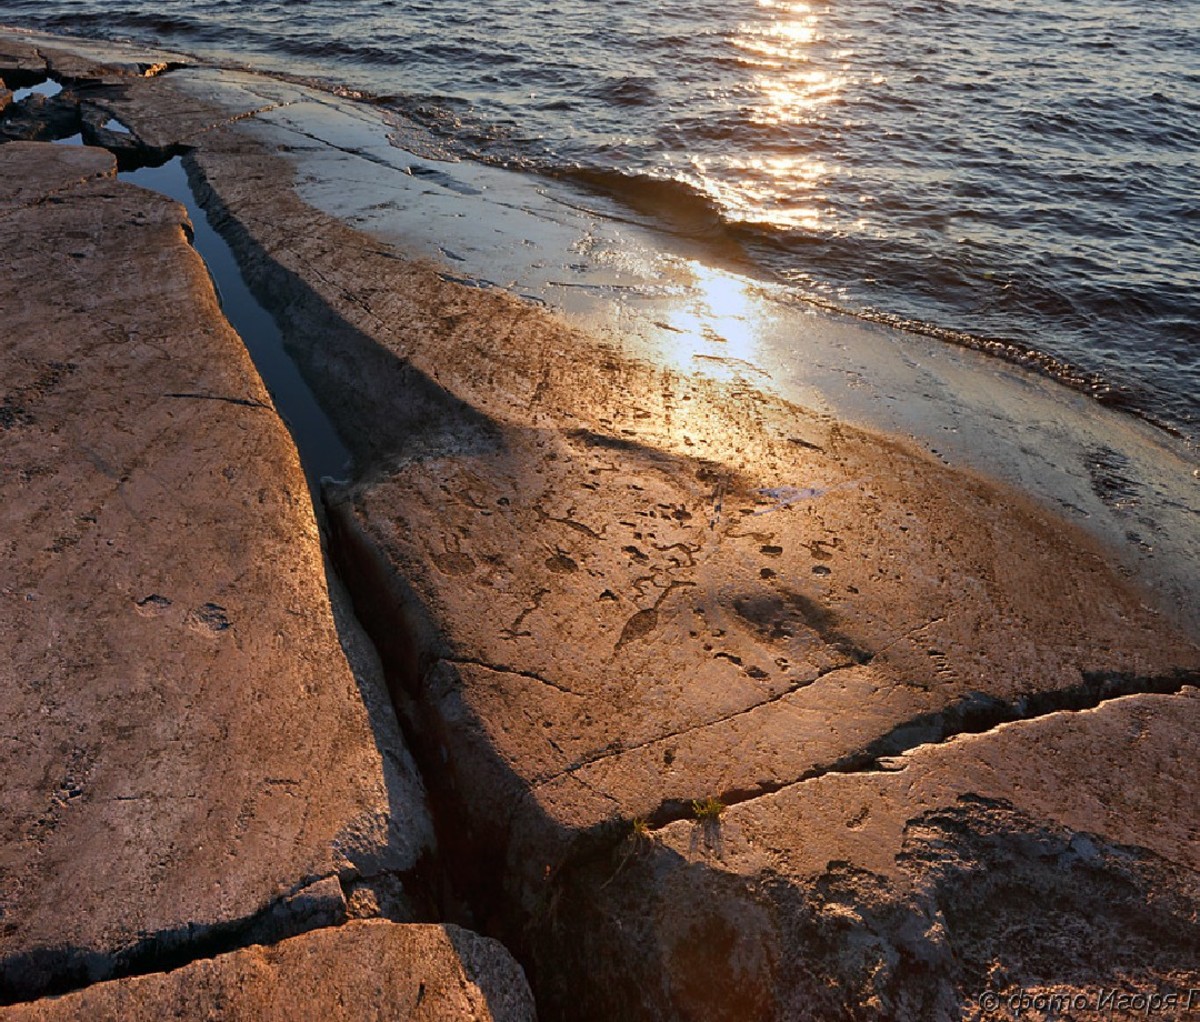 Located on Lake Onega and the White Sea, 4,500 petroglyphs carved into rock 6 to 7 thousand years ago.